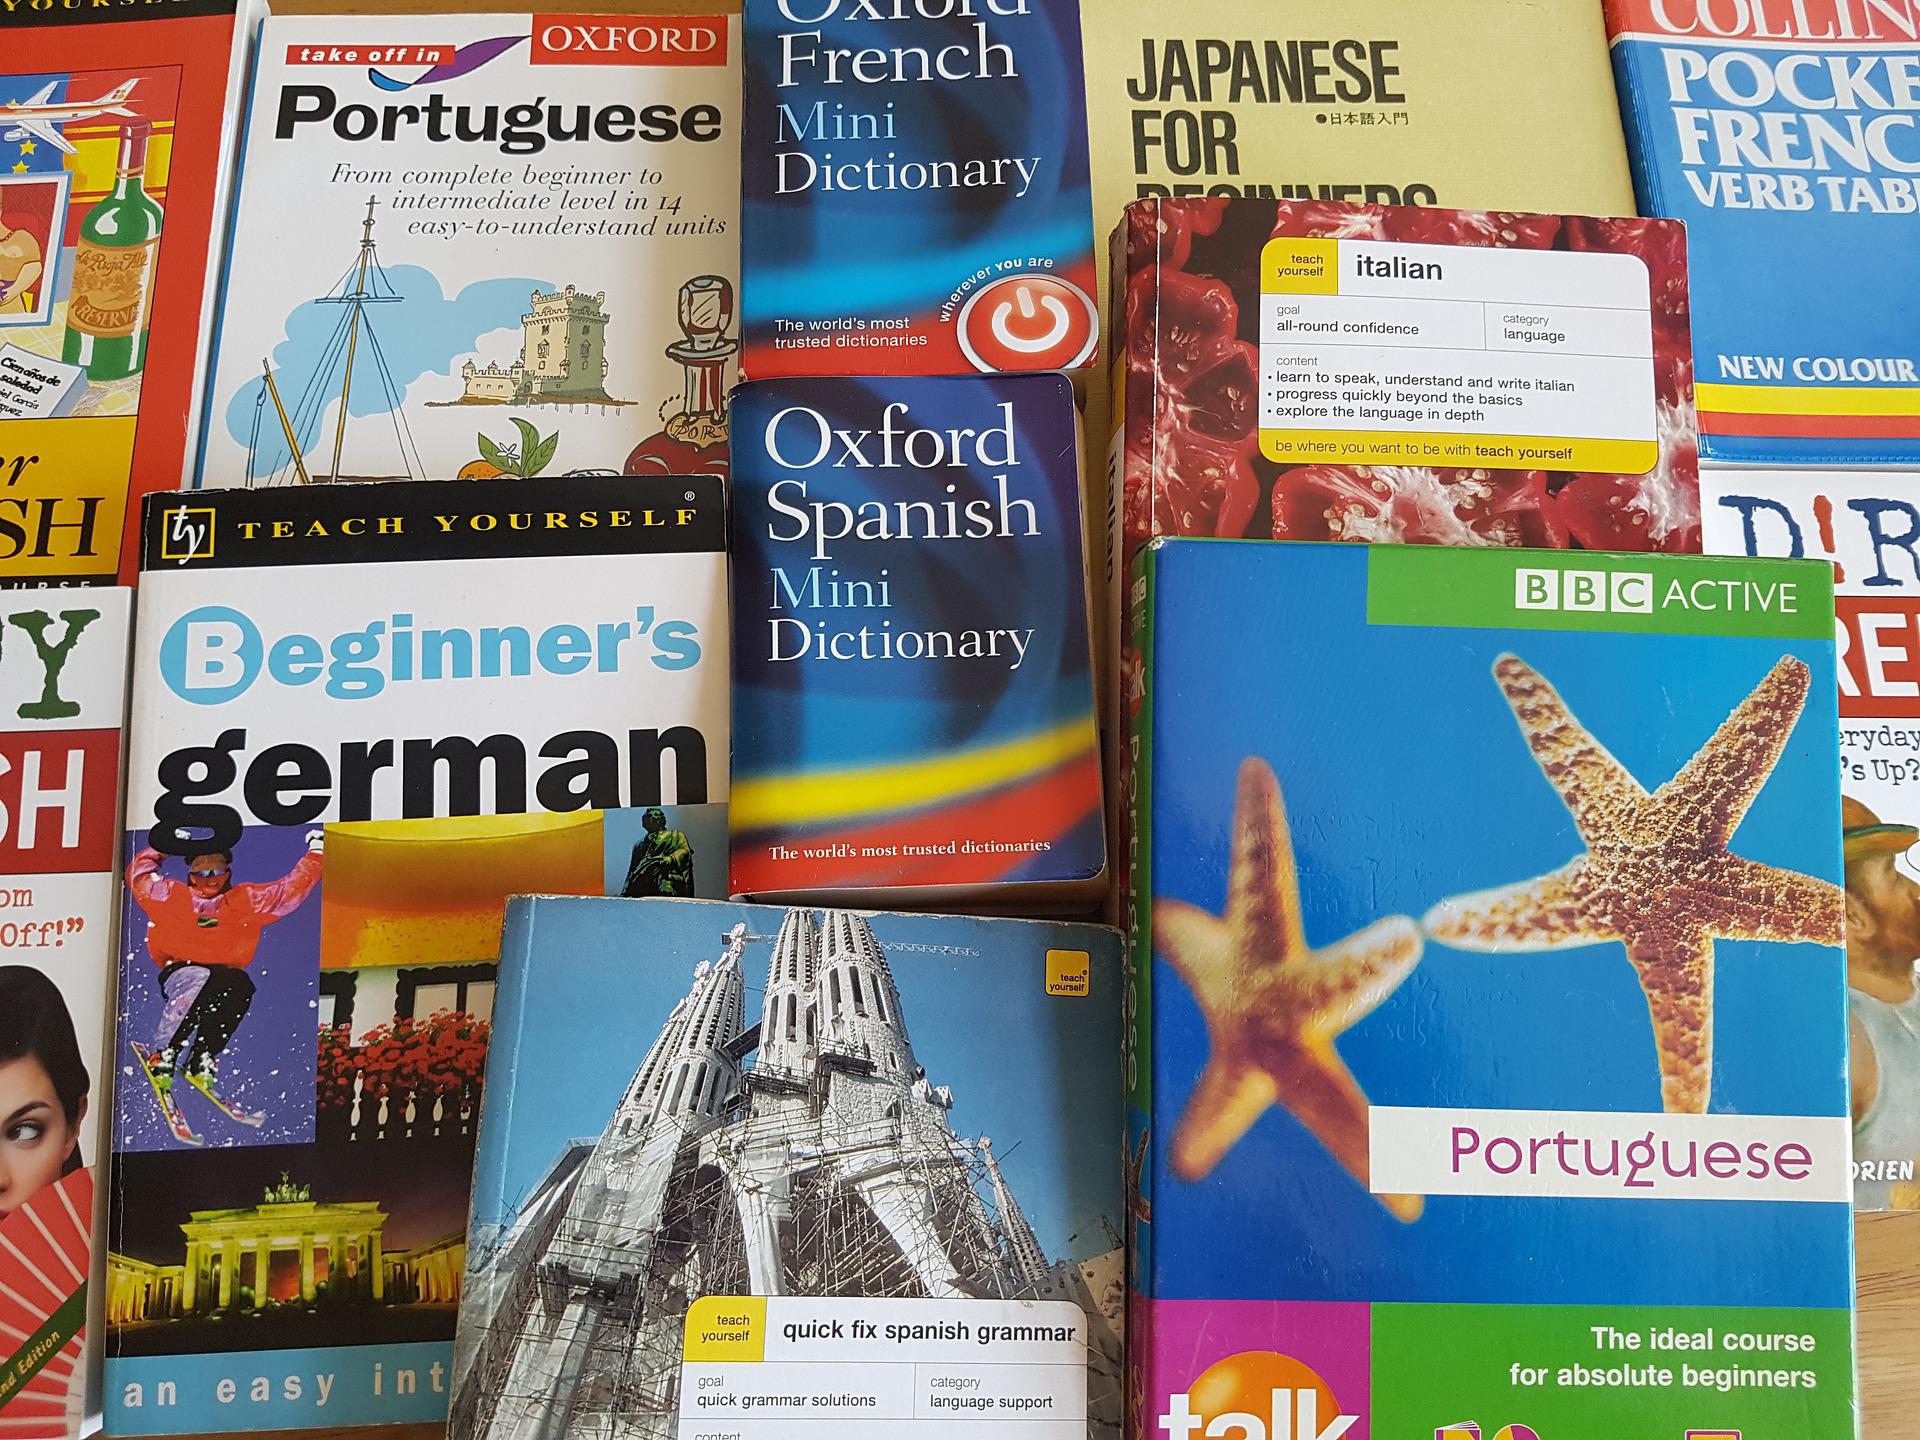 photo of language books and dictionaries